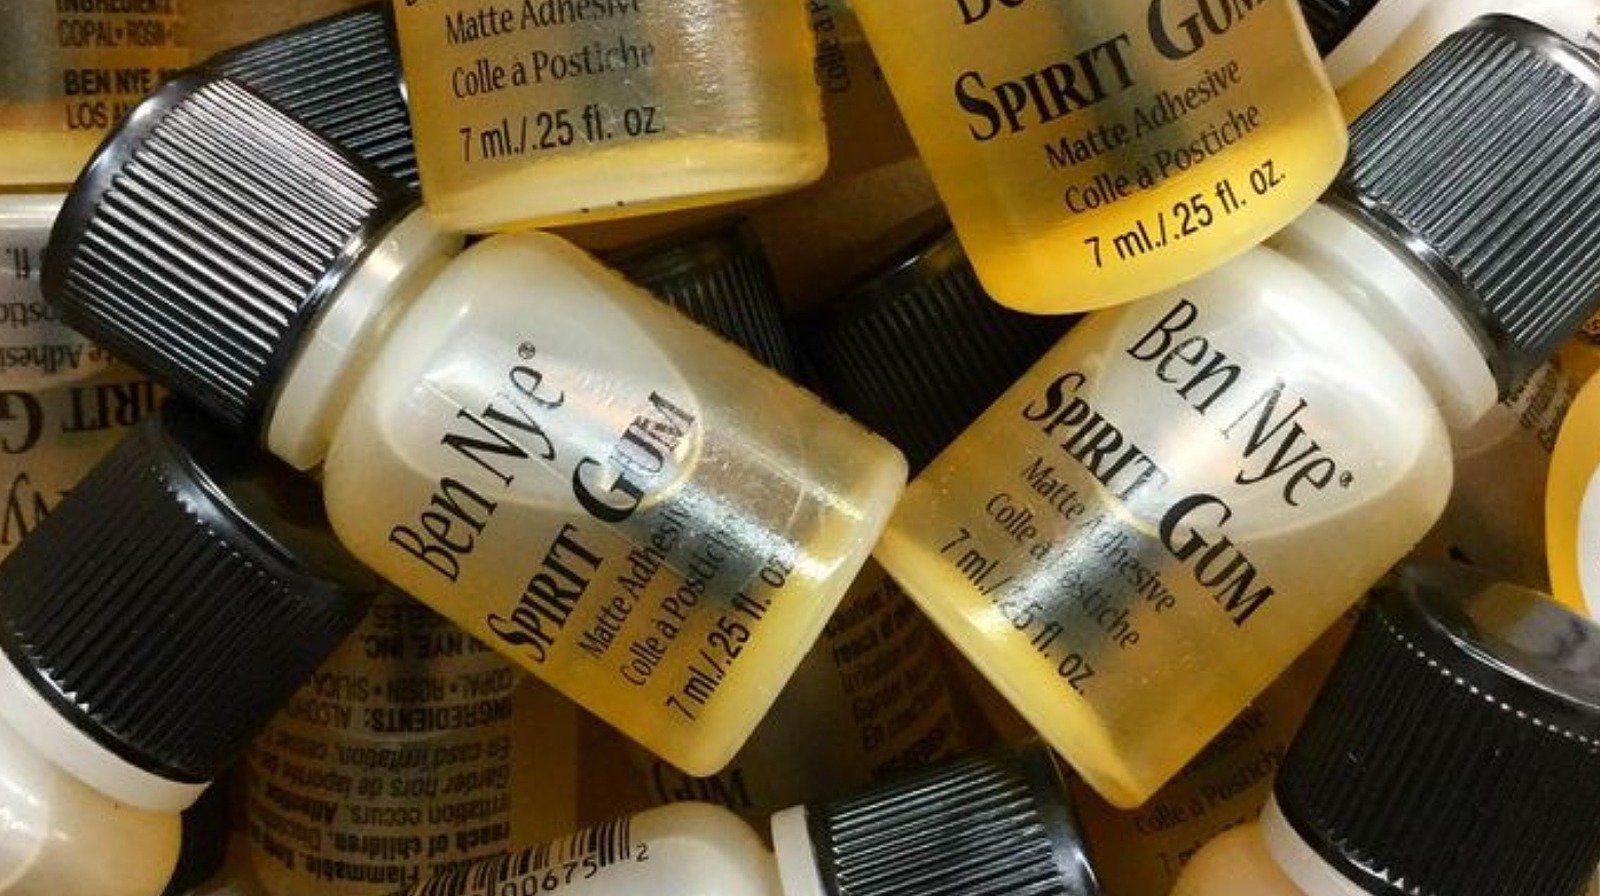 What To Know About Spirit Gum And How To Use It In Your Beauty Routine - Glam